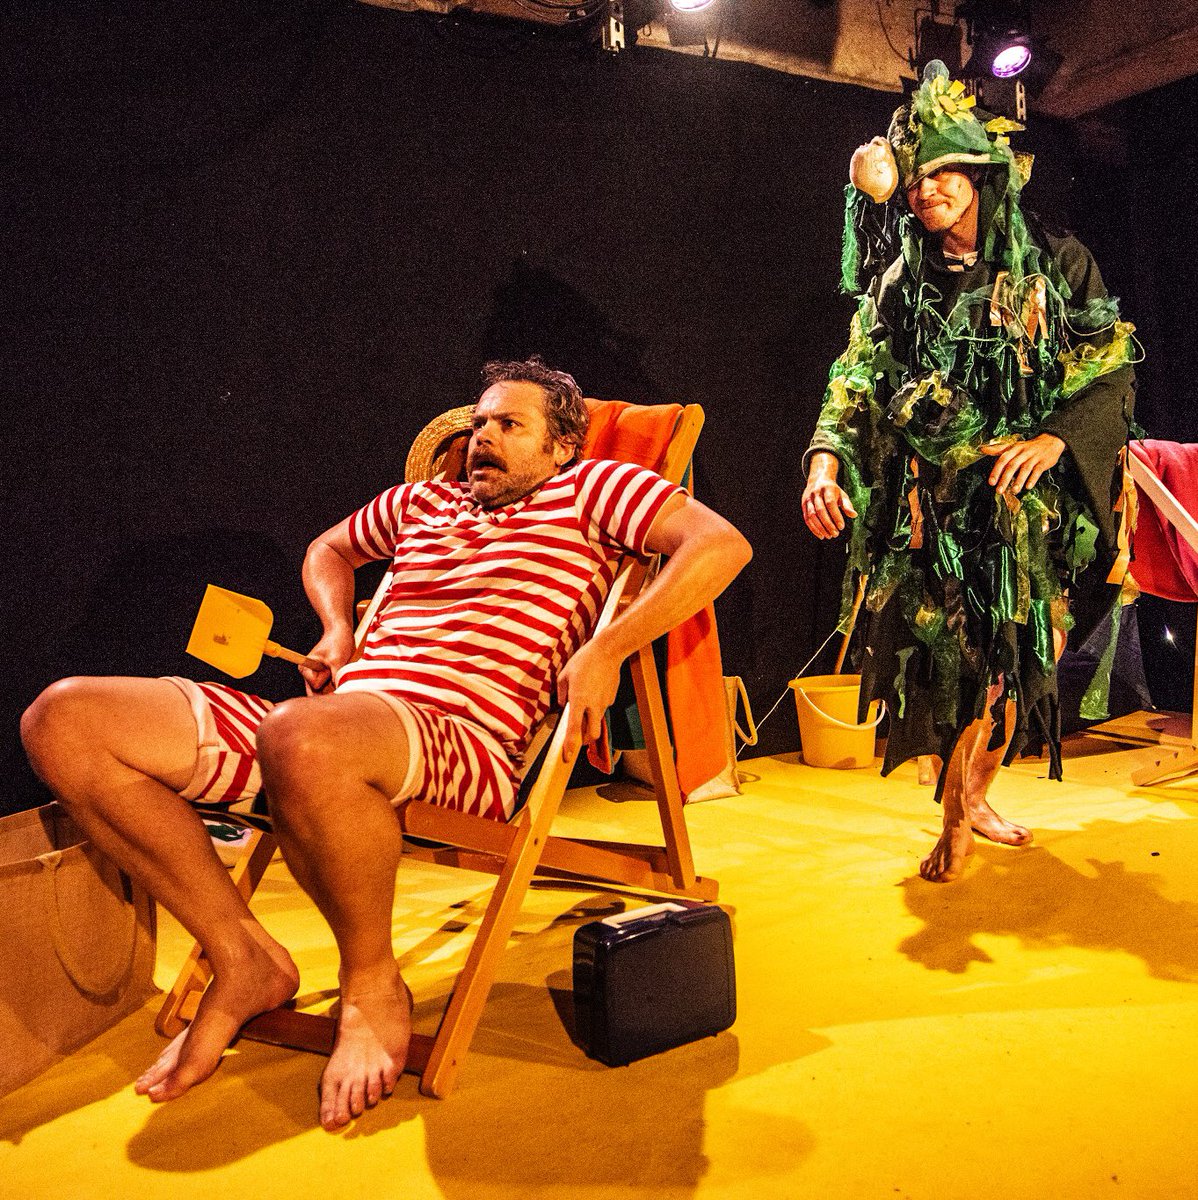 Family fun this summer - with one of our favourite companies! @StickyBack SUNSHINE Sat 25 May A highly interactive, brilliantly bonkers, life affirming show. CLOWNING WORKSHOP Sat 29 June Unleash the giggles with a clowning workshop tailored for kids. thecockpit.org.uk/show/sunshine